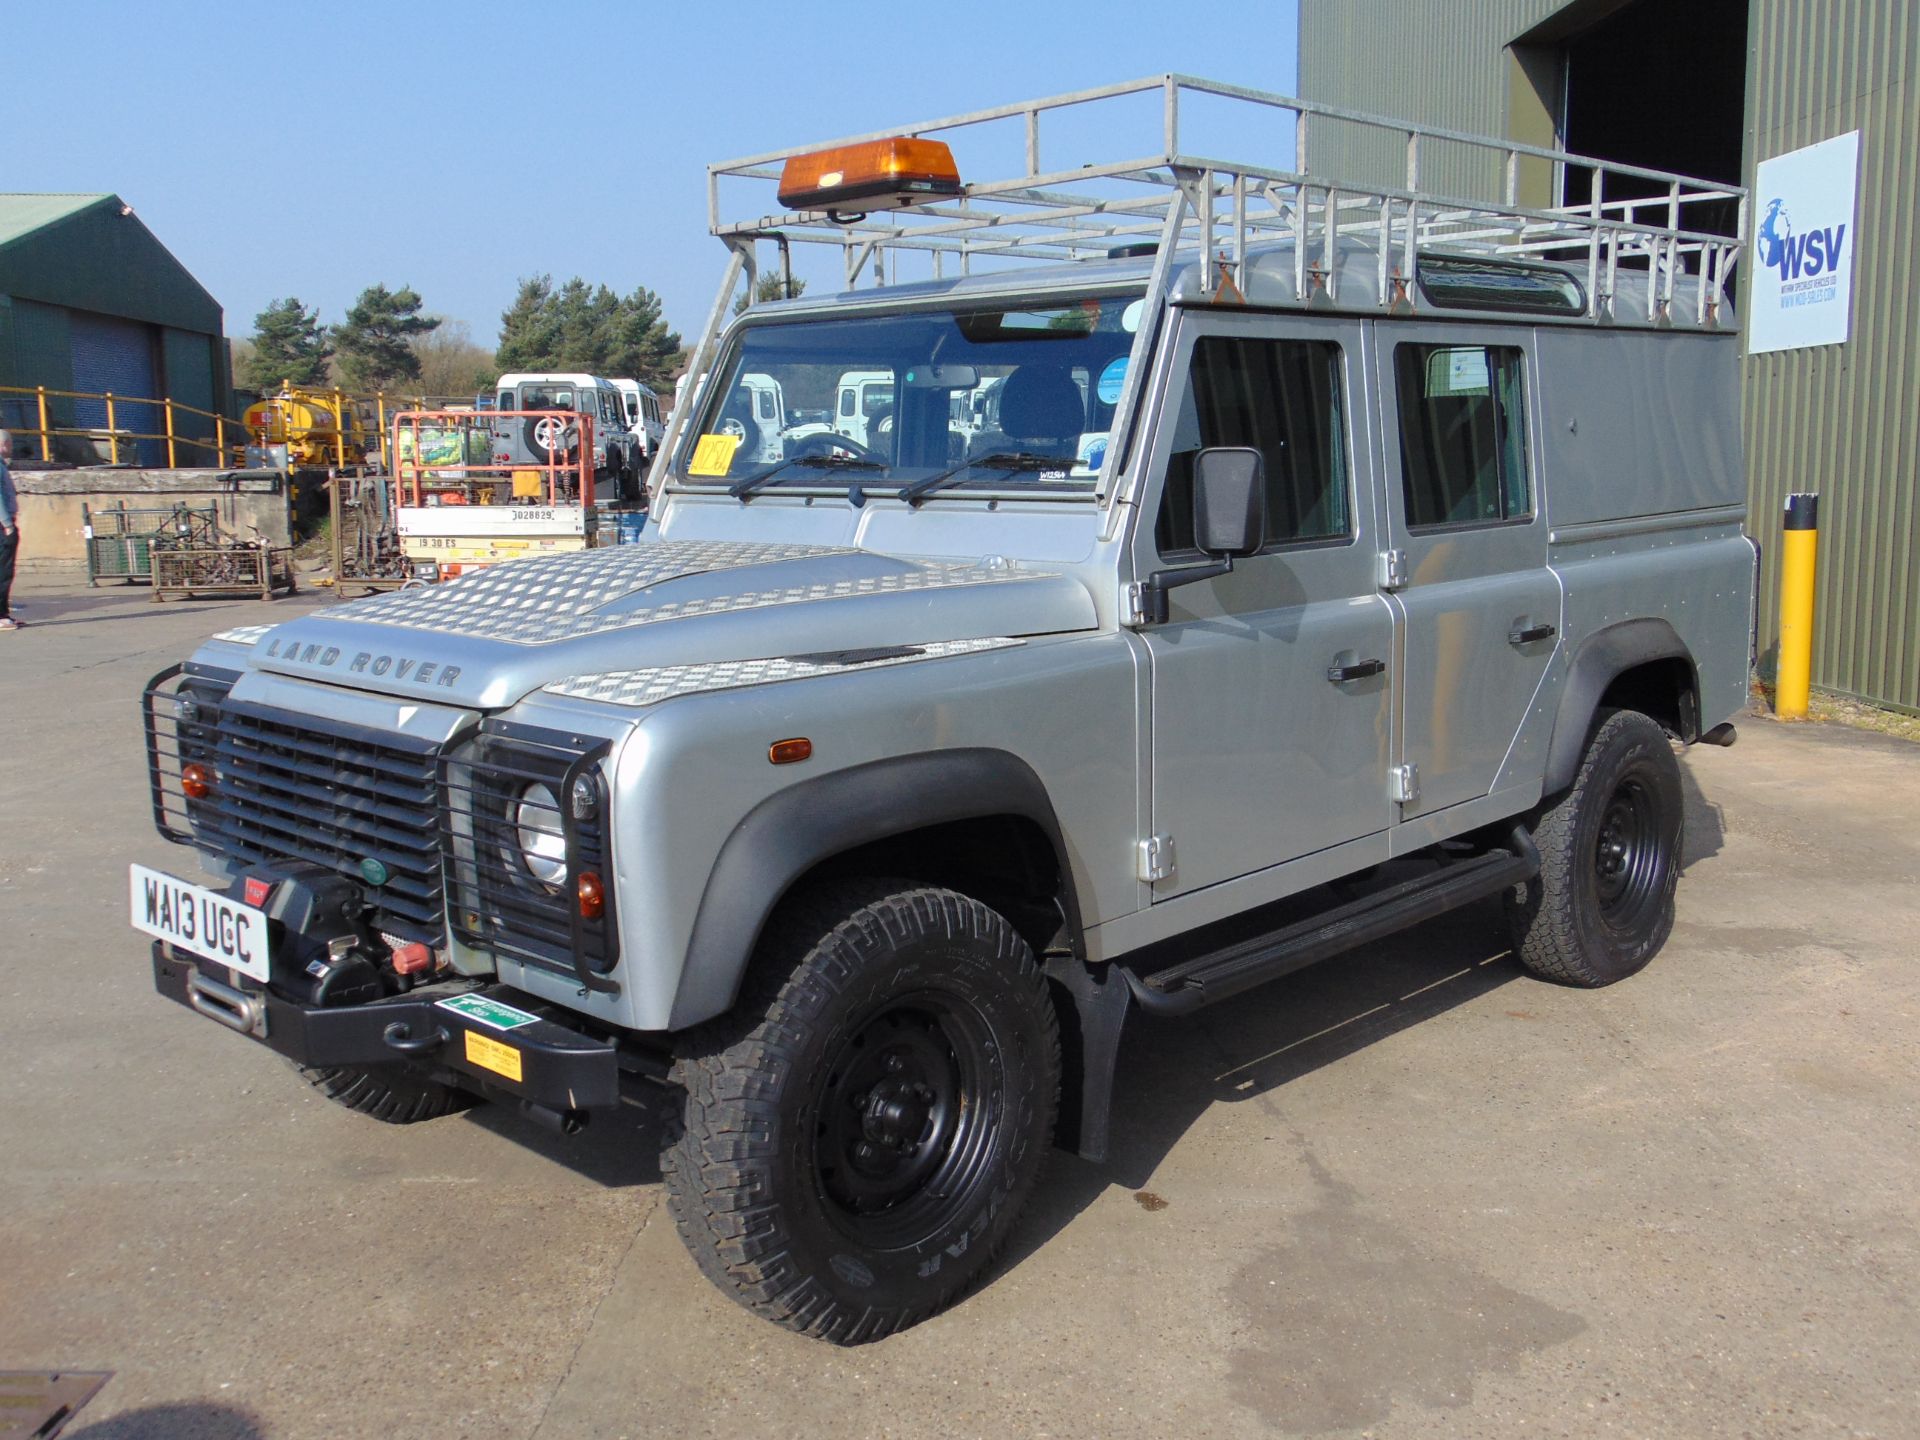 1 Owner 2013 Land Rover Defender 110 Utility 5 door 5 seater ONLY 83,117 MILES! - Image 3 of 33